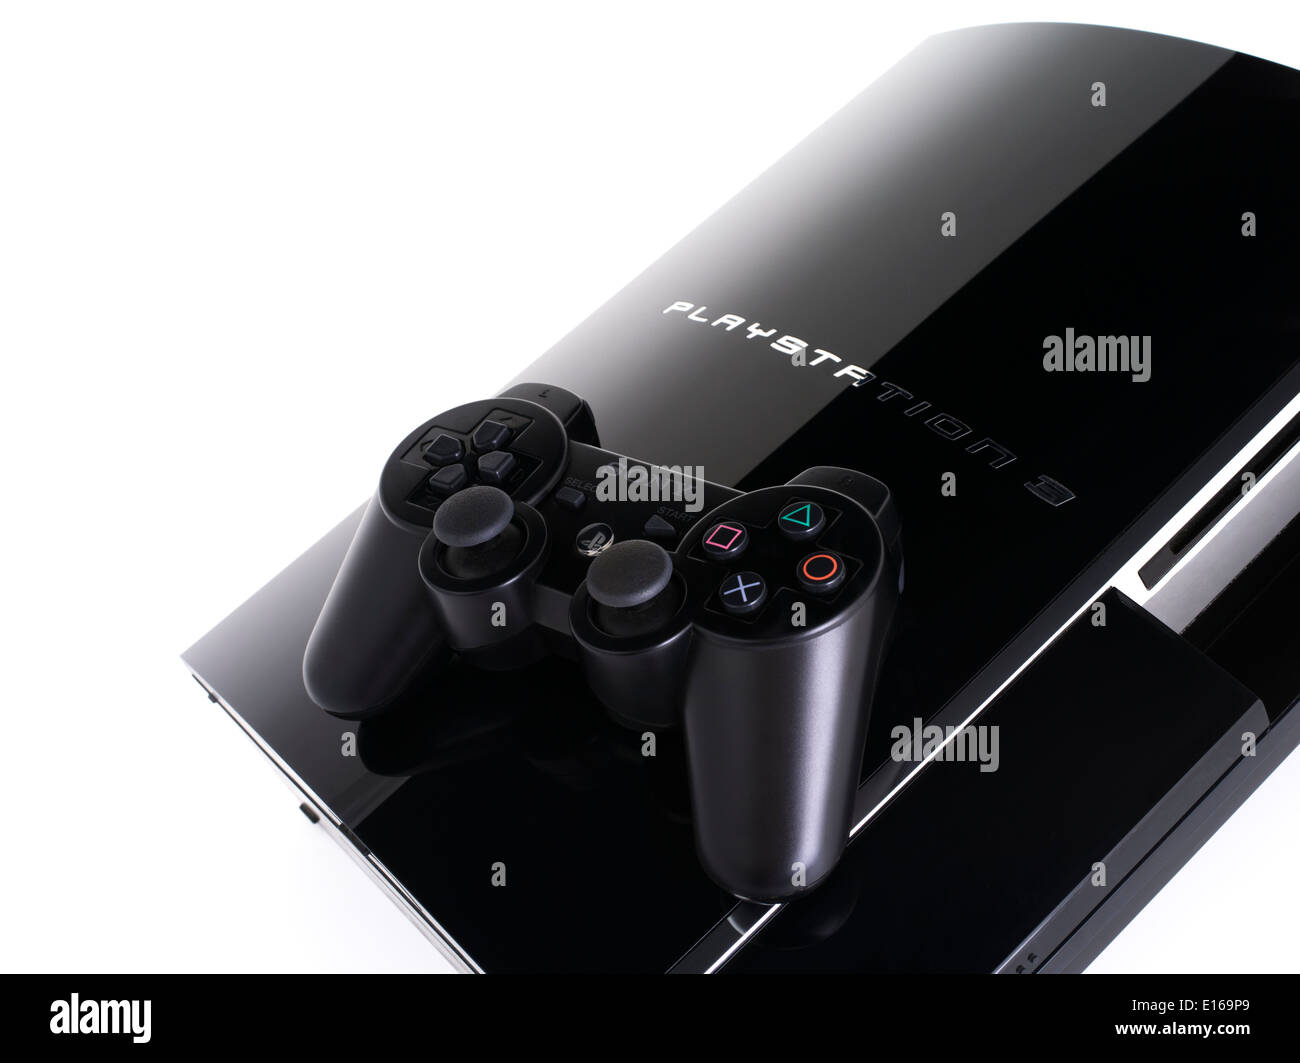 Sony PlayStation 3 video game console system released Japan 11/ 11/ 2006  Stock Photo - Alamy